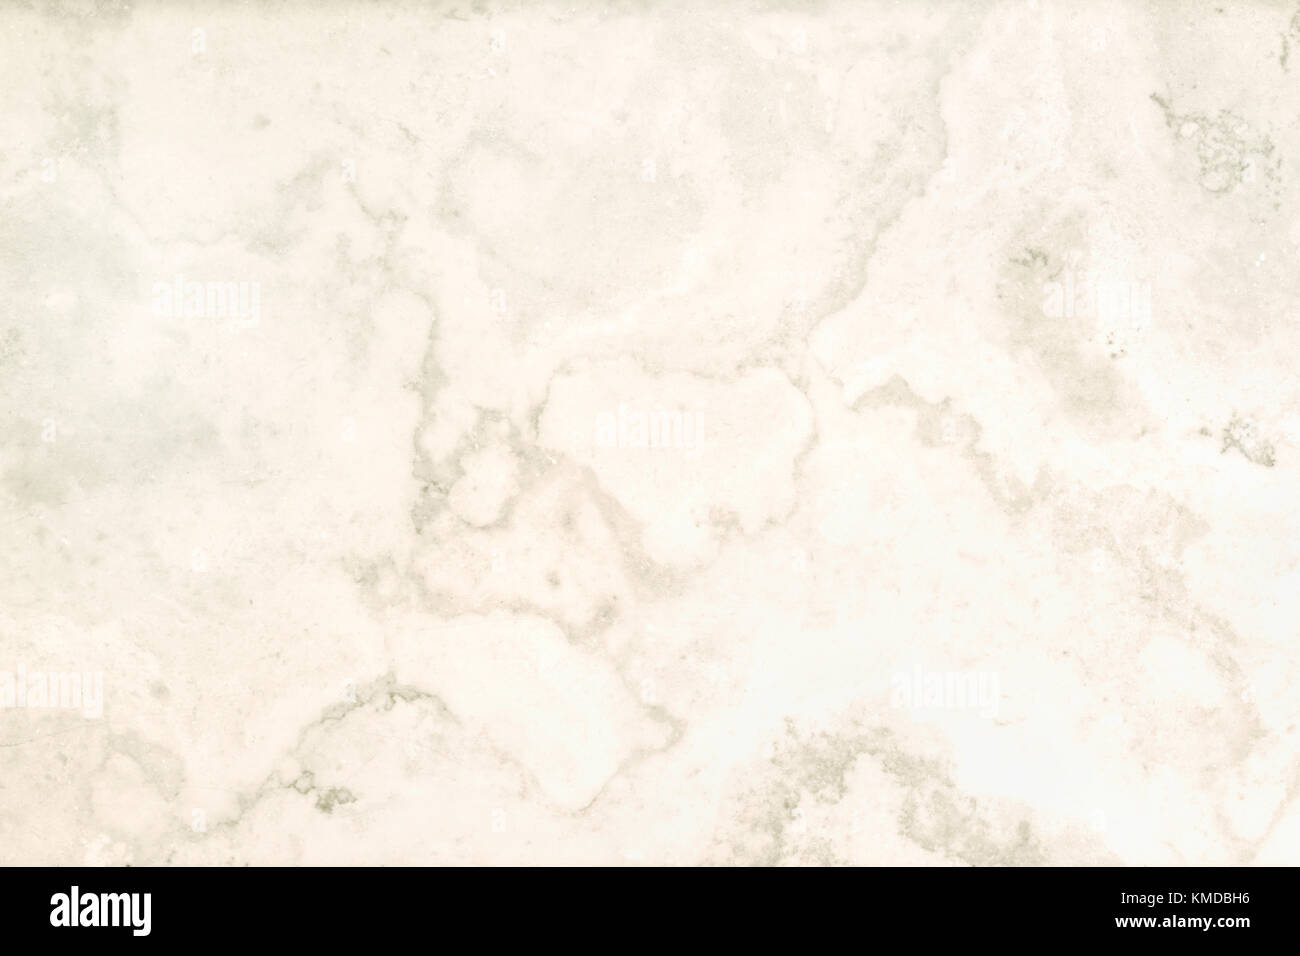 Beige Marble stone natural light for bathroom or kitchen white countertop. High resolution texture and pattern. Stock Photo